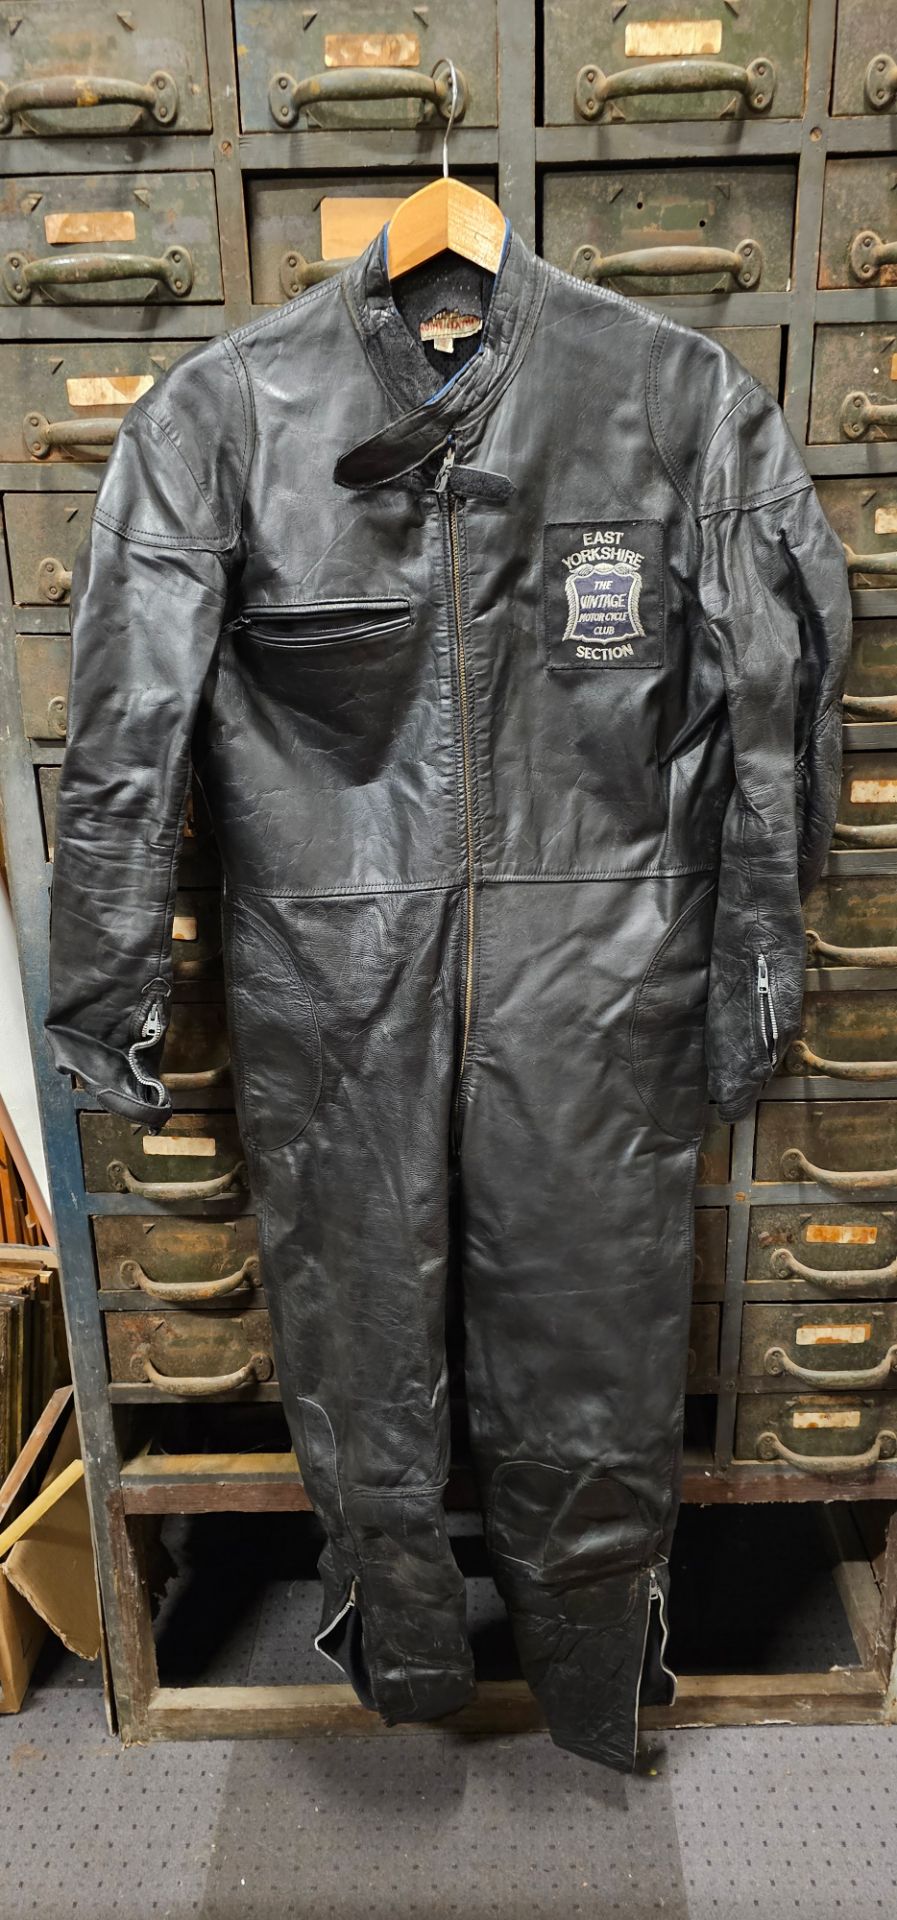 A Lewis Leathers one piece leather suit, size 42, recent lining, with original ticket and cloth